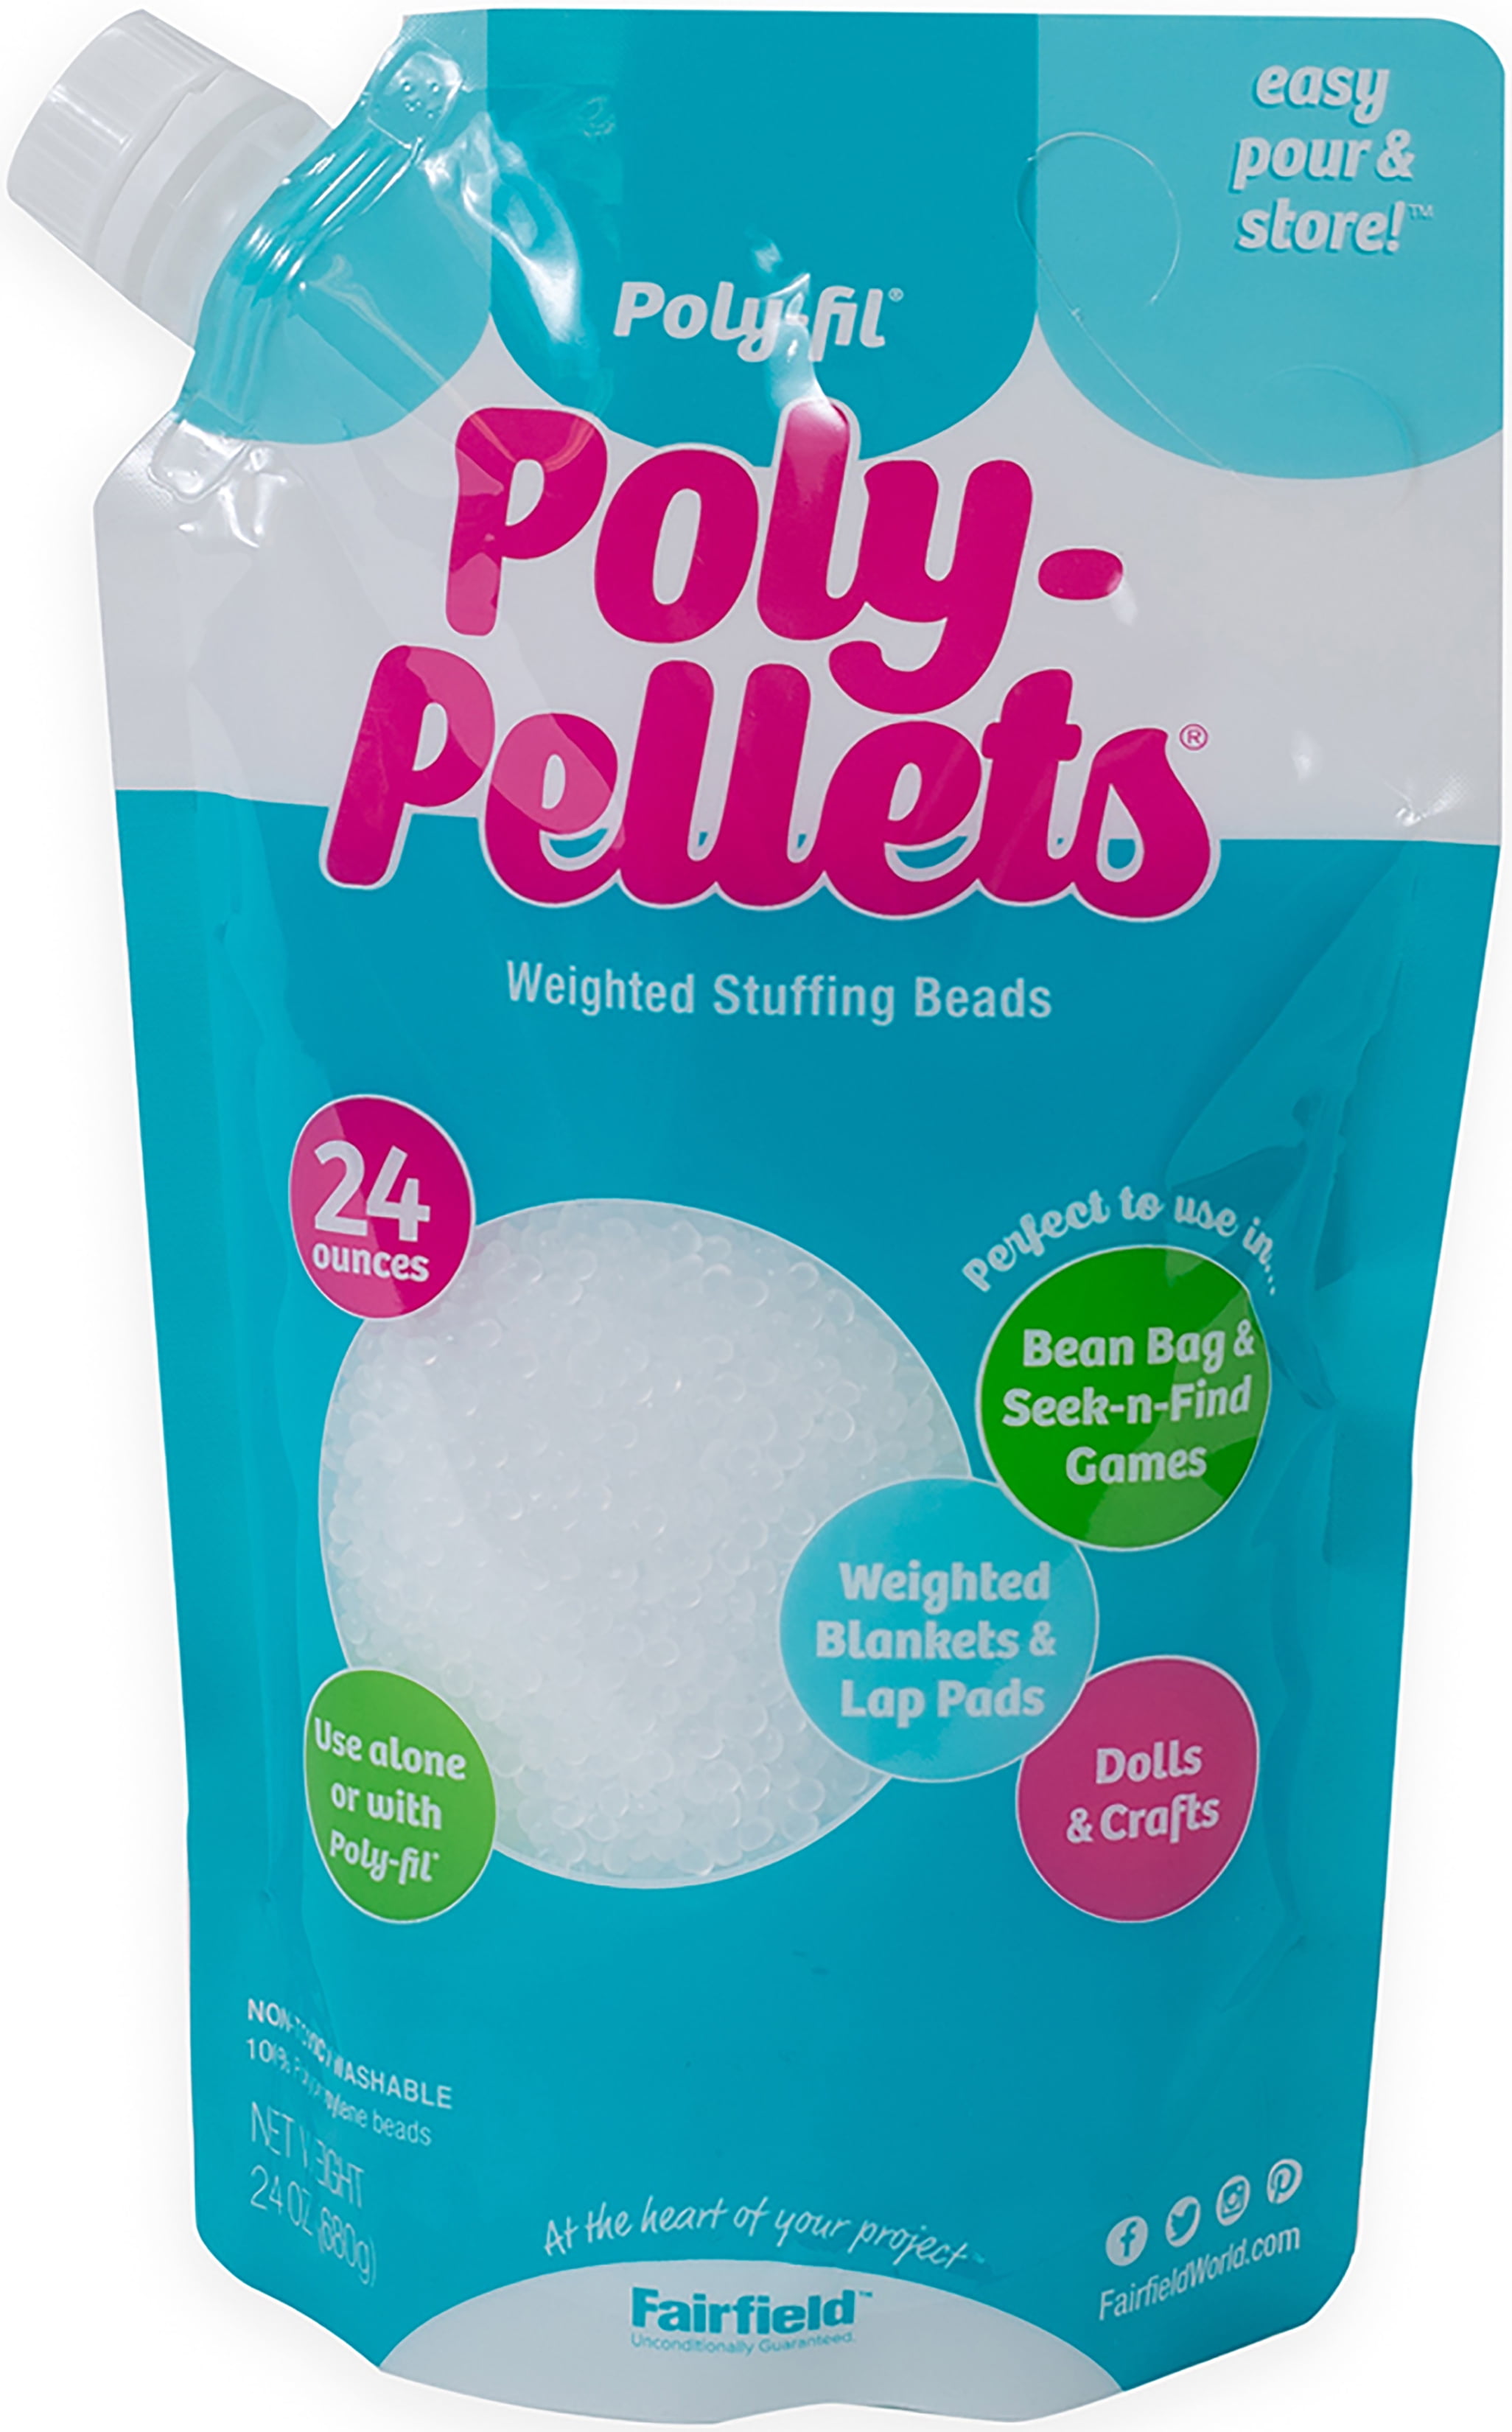 Poly-Fil® Poly Pellets® Weighted Stuffing Beads, 10lb.